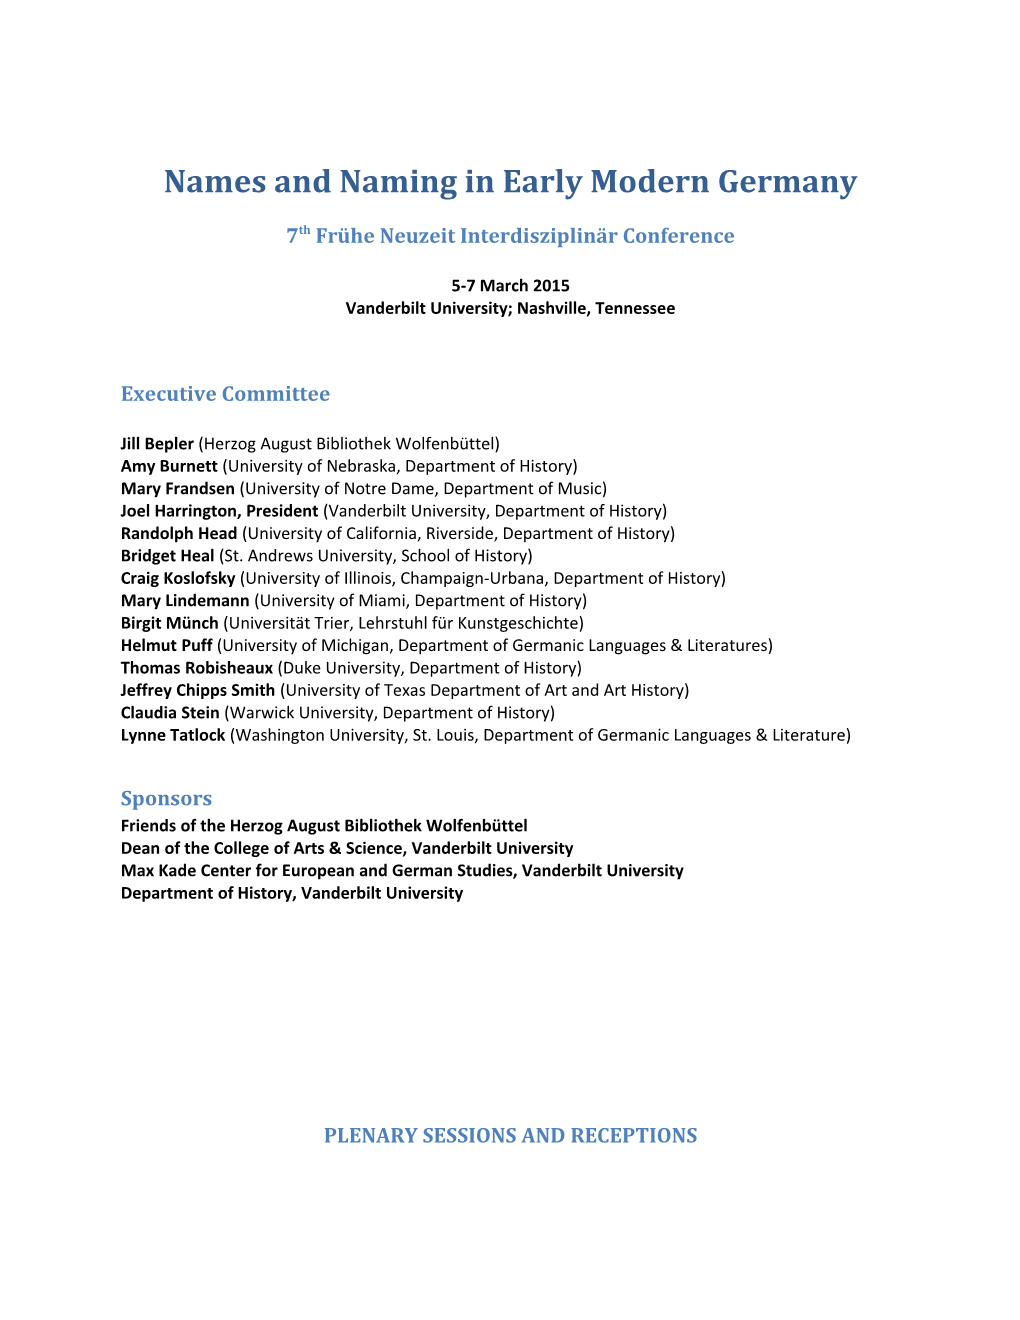 Names and Naming in Early Modern Germany